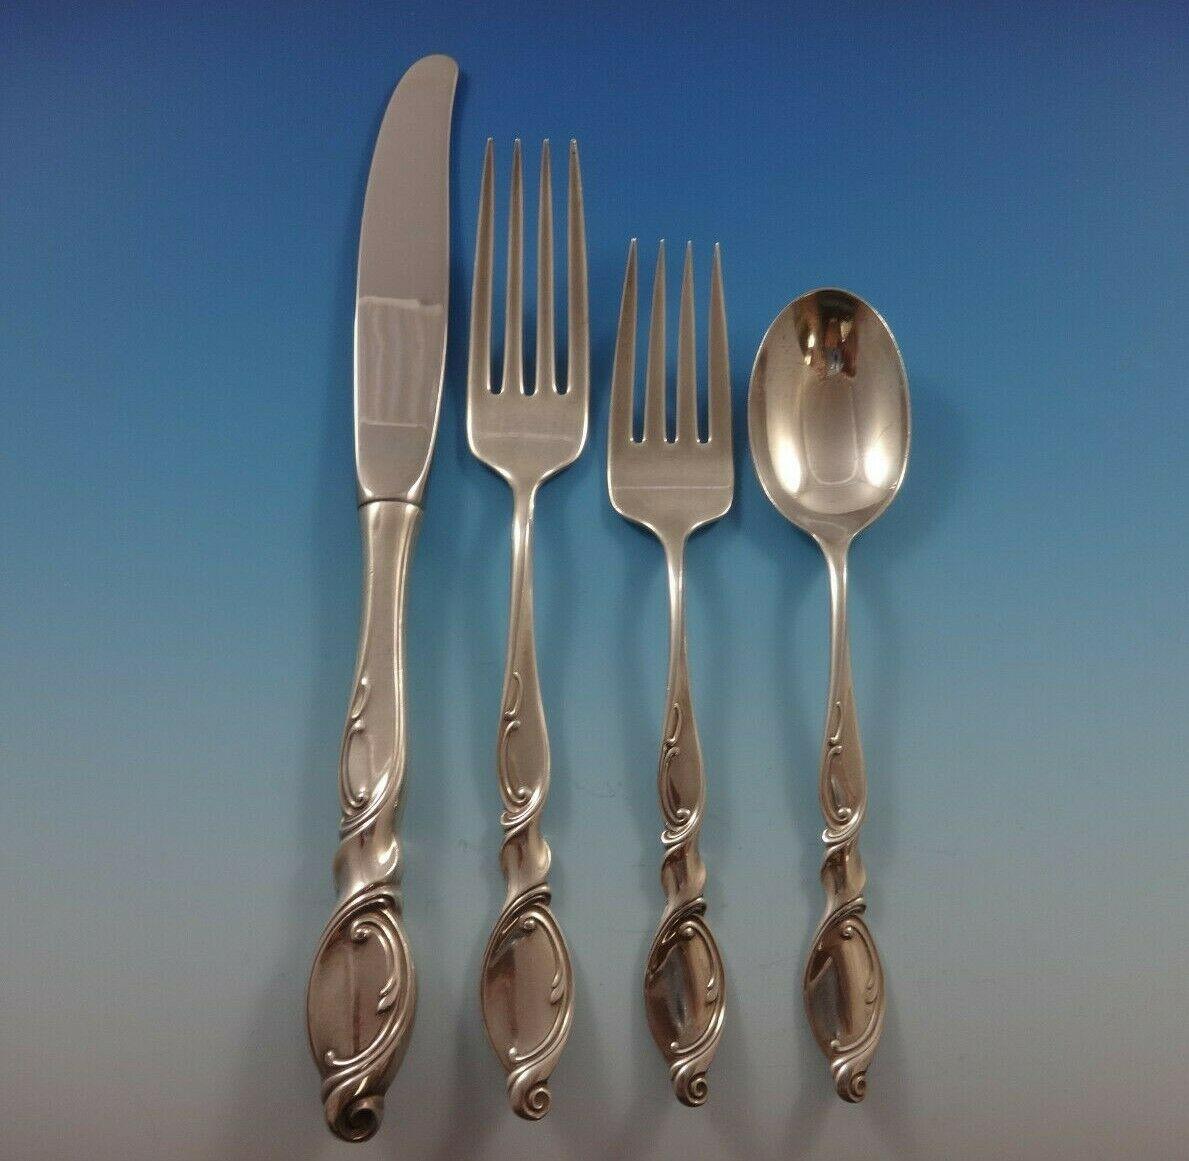 Silver Swirl by Wallace sterling silver Flatware set - 30 pieces. Great starter set! This set includes:

6 knives, 9